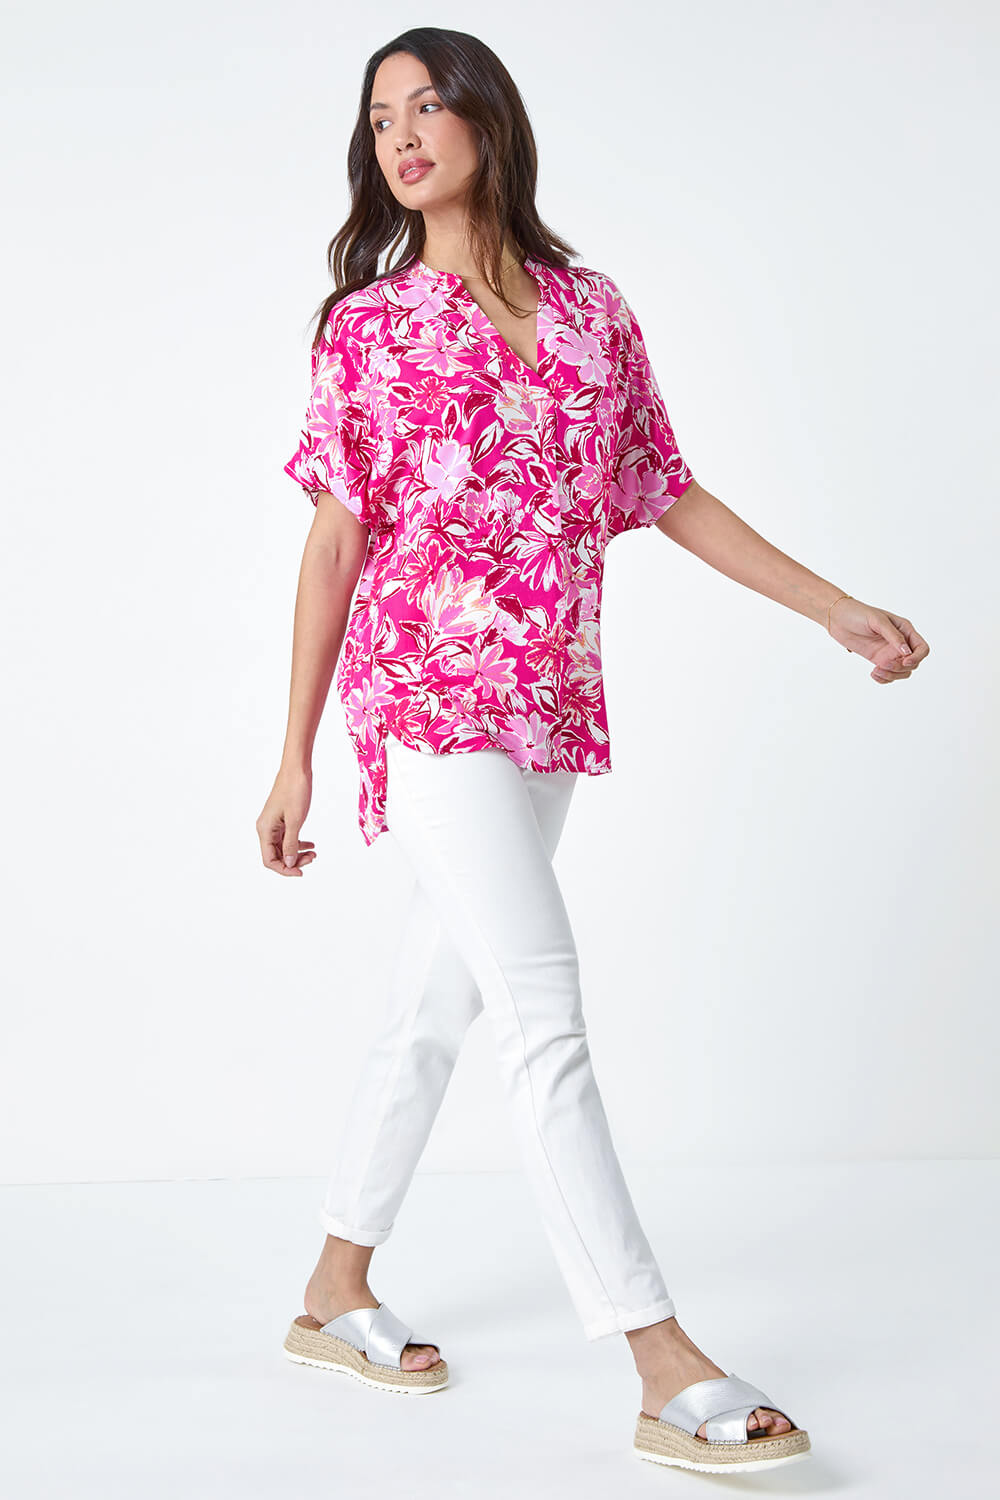 PINK Floral Print Pleat Front Overshirt, Image 2 of 5